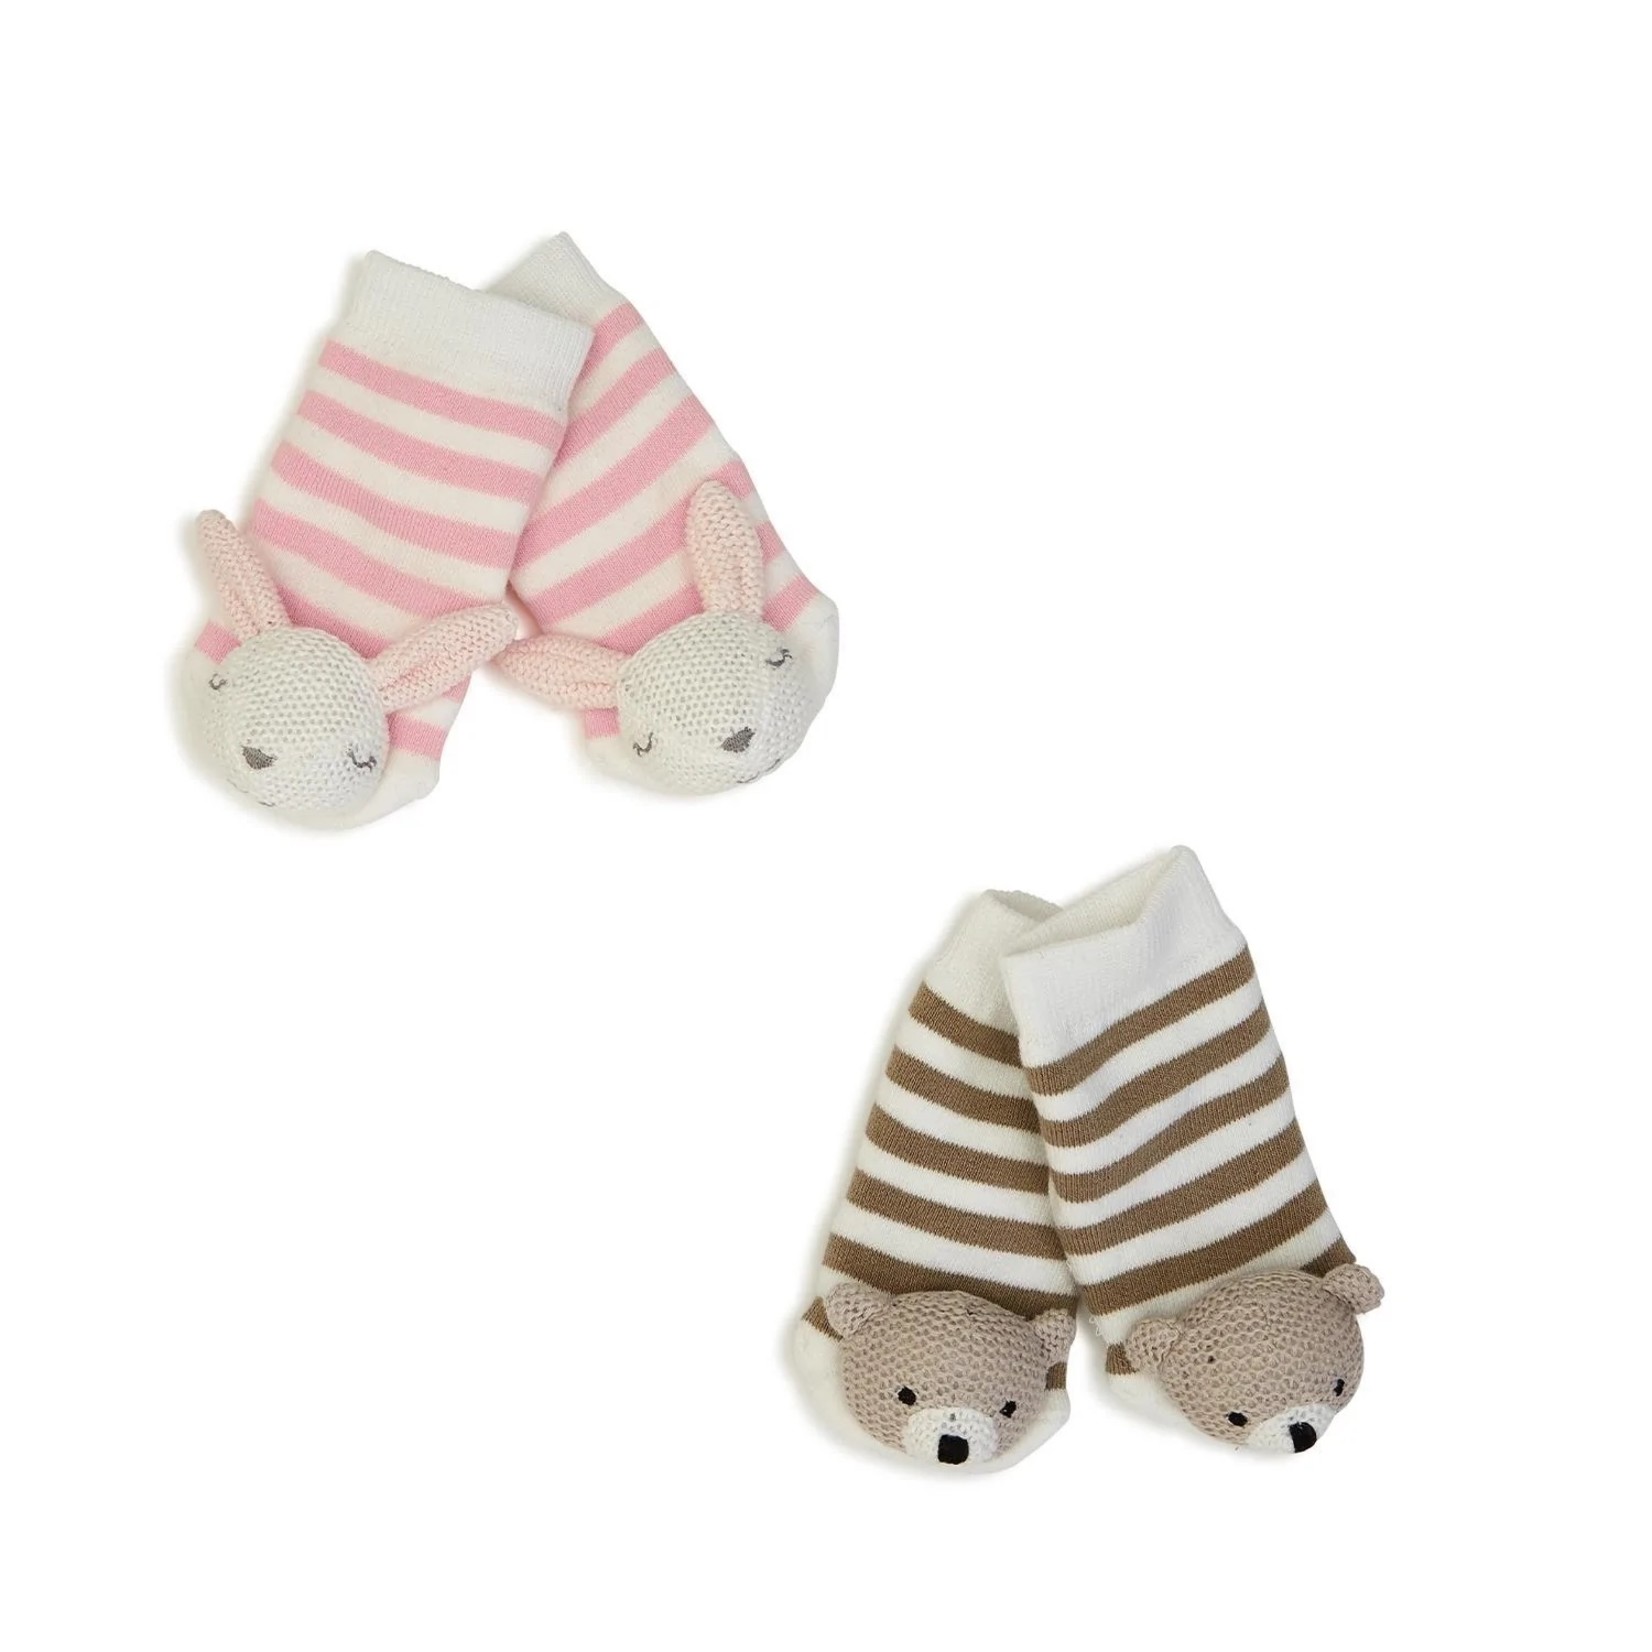 Two's Company Knit Animal Rattle Socks in Gift Box